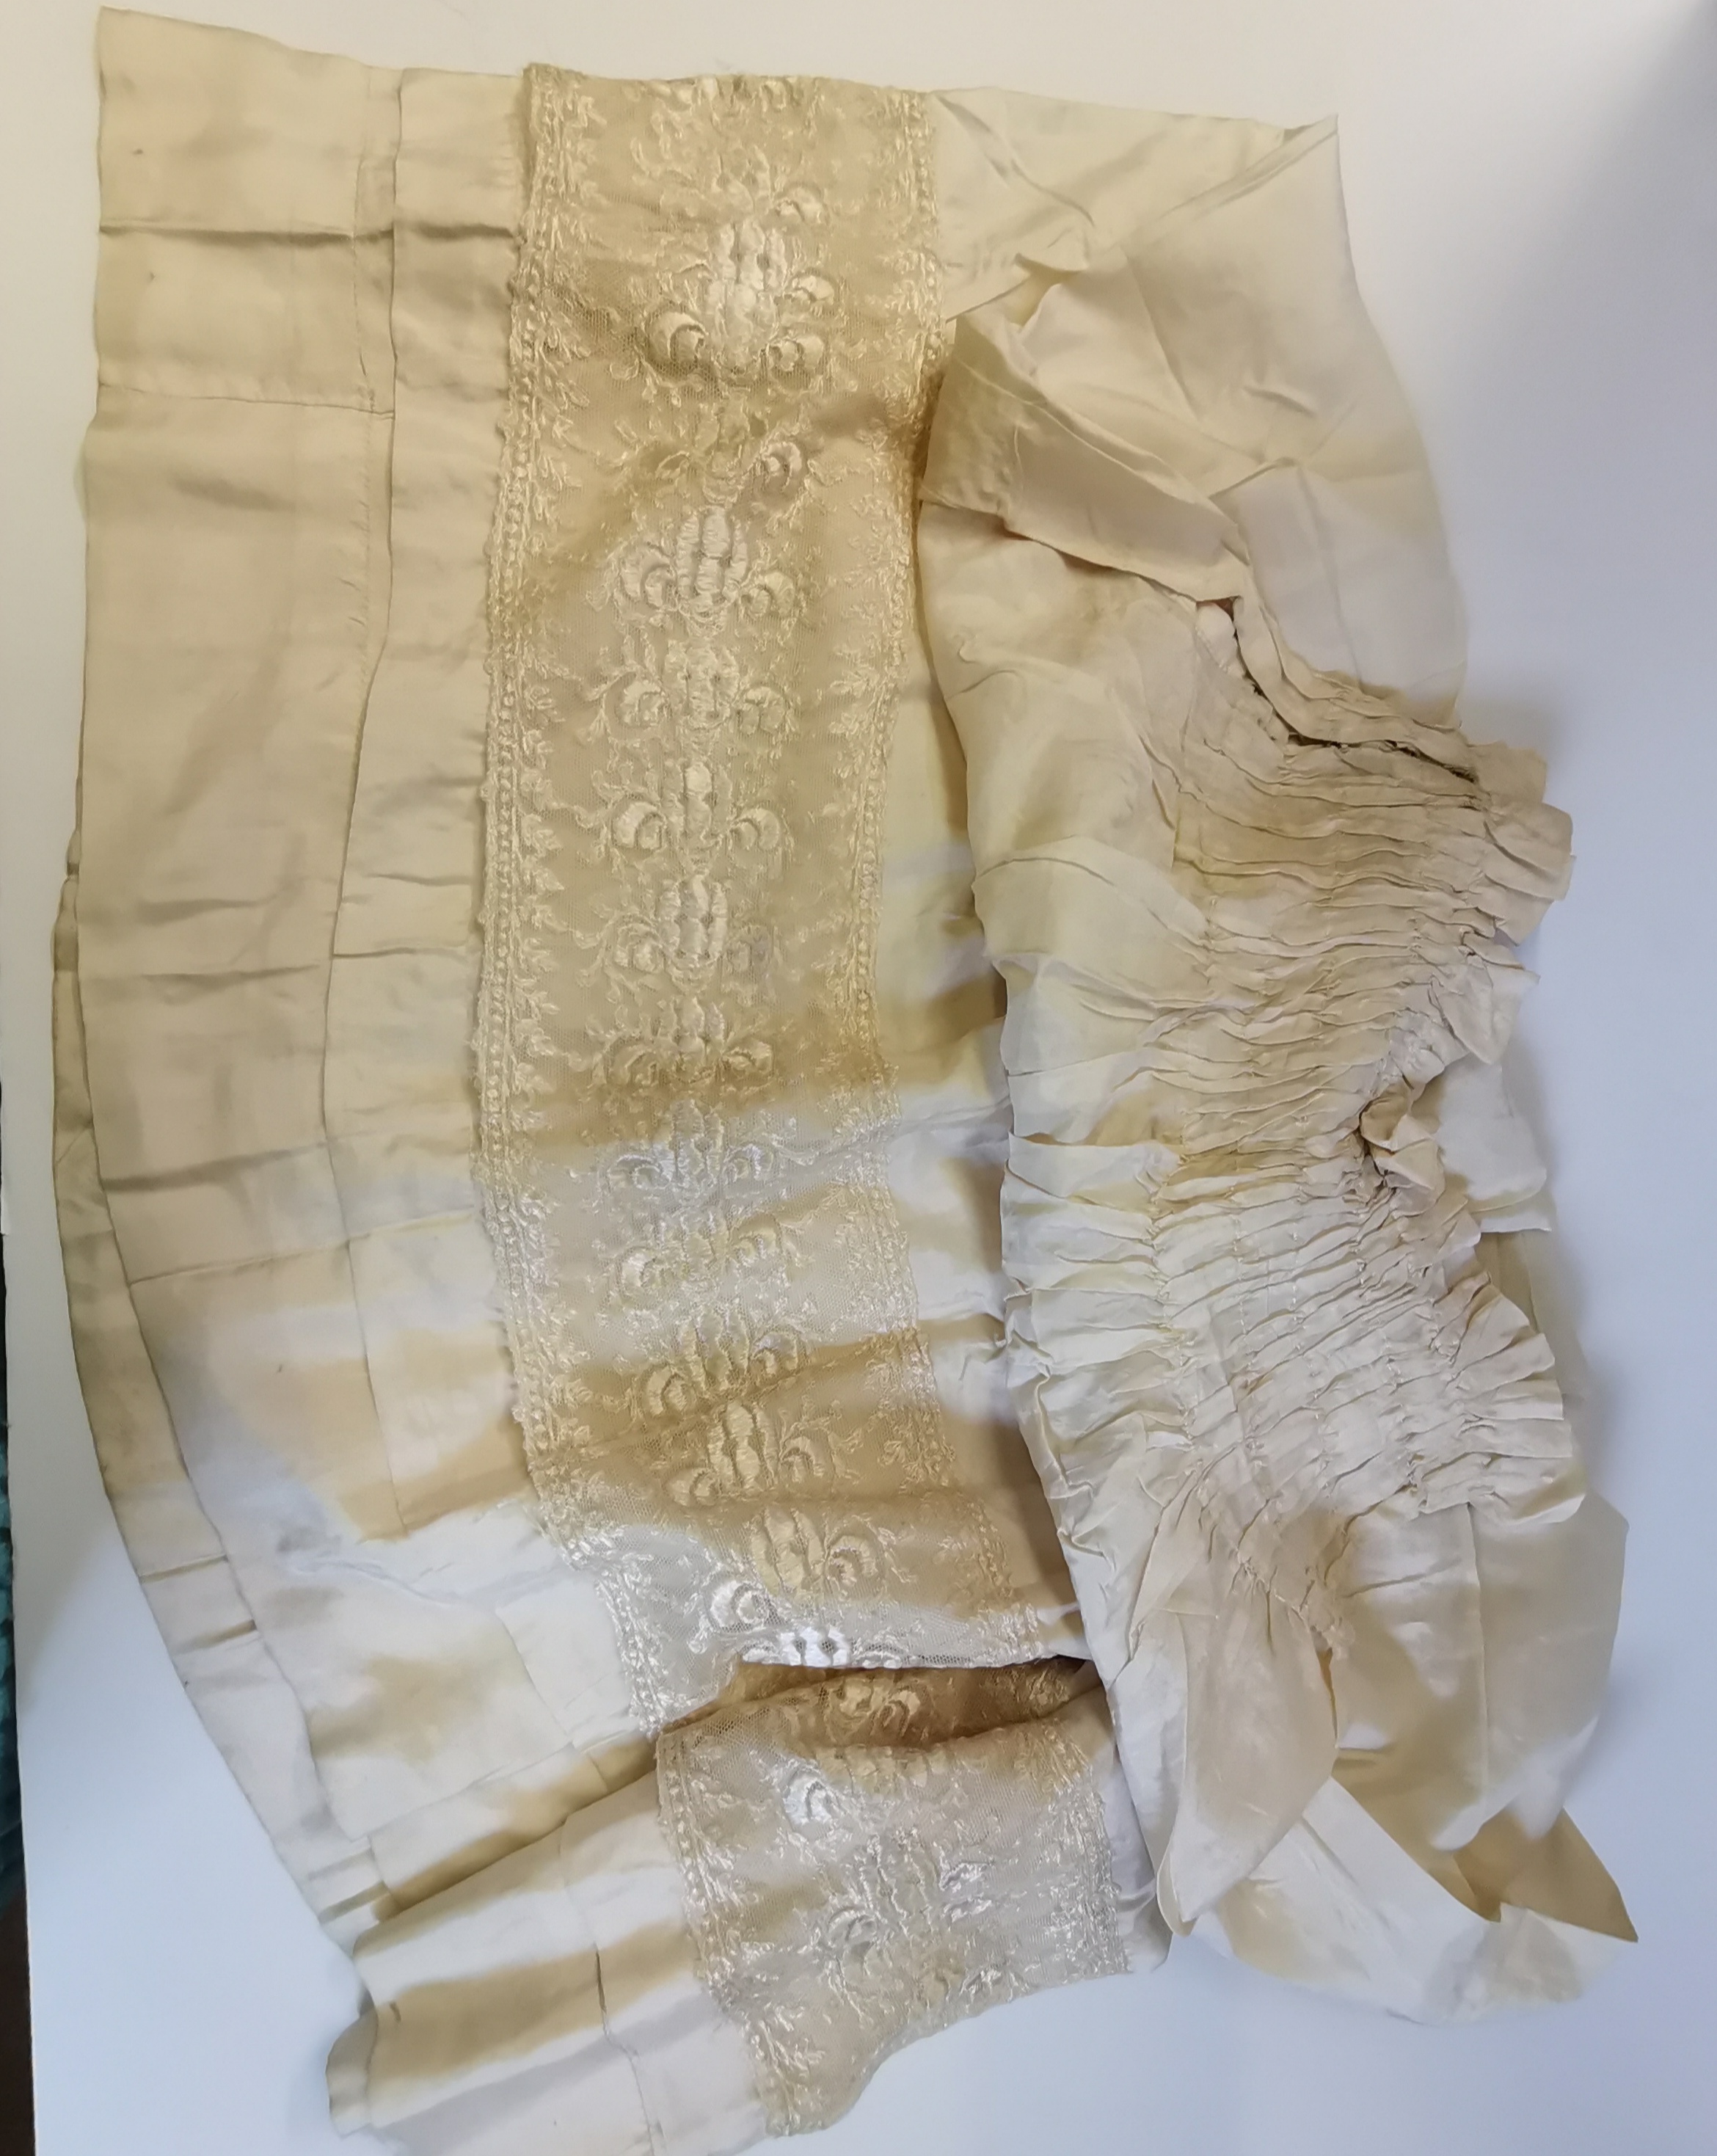 Antique silk and lace items - wedding veil, Christening robe etc - Image 7 of 8